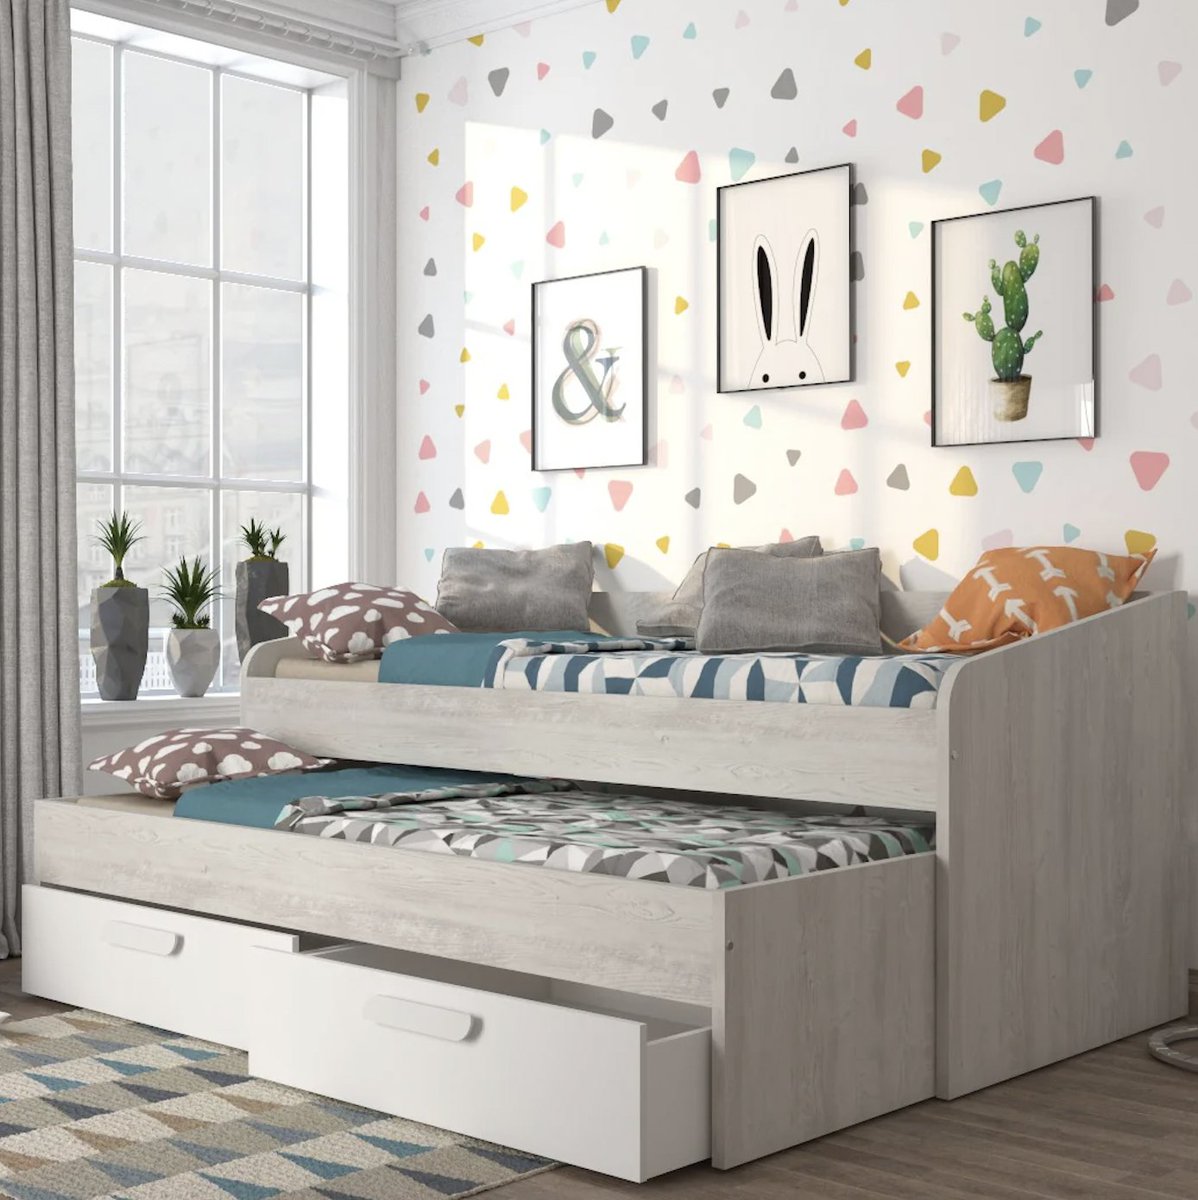 Say goodbye to blowing up the air mattress 5 minutes before bedtime! 

Say hello to pull-out comfy beds! 

#ChildrensBedroom #ChildrensFurniture #KidsFurniture #BunkBeds #KidsInterior #KidsDecor #BedroomDecor #BedroomFurniture #BedDrawer #ComfortableBeds #CabinBed